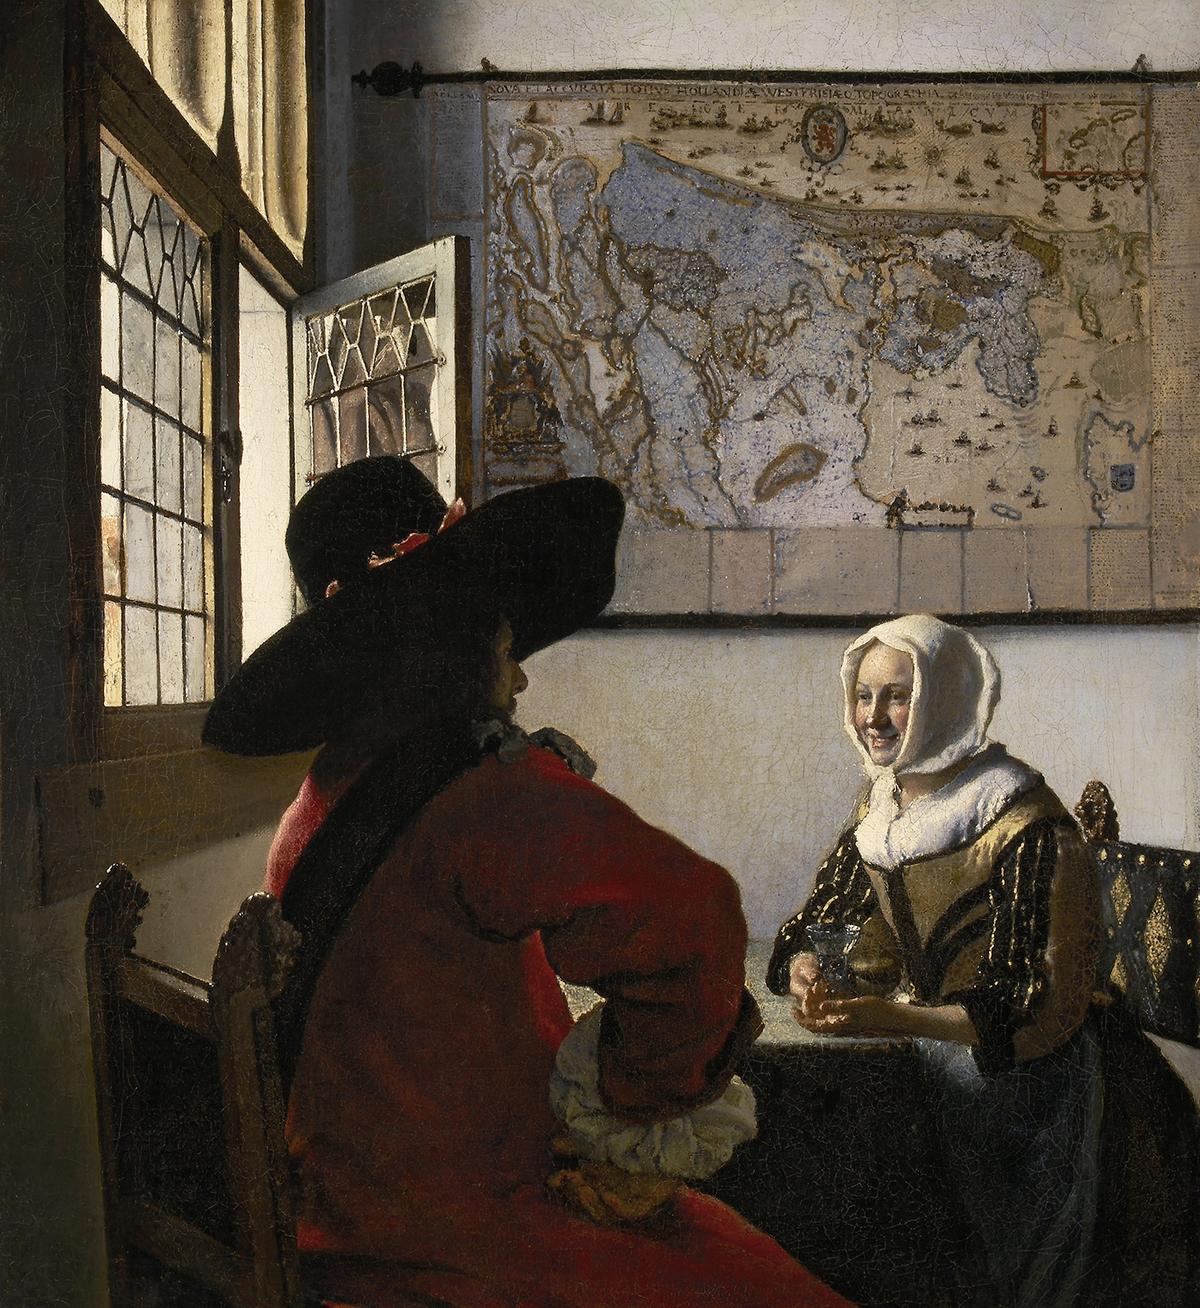 "Officer and Laughing Girl," circa 1657, by Johannes Vermeer. Oil on canvas. The Frick Collection, New York. (Public Domain)